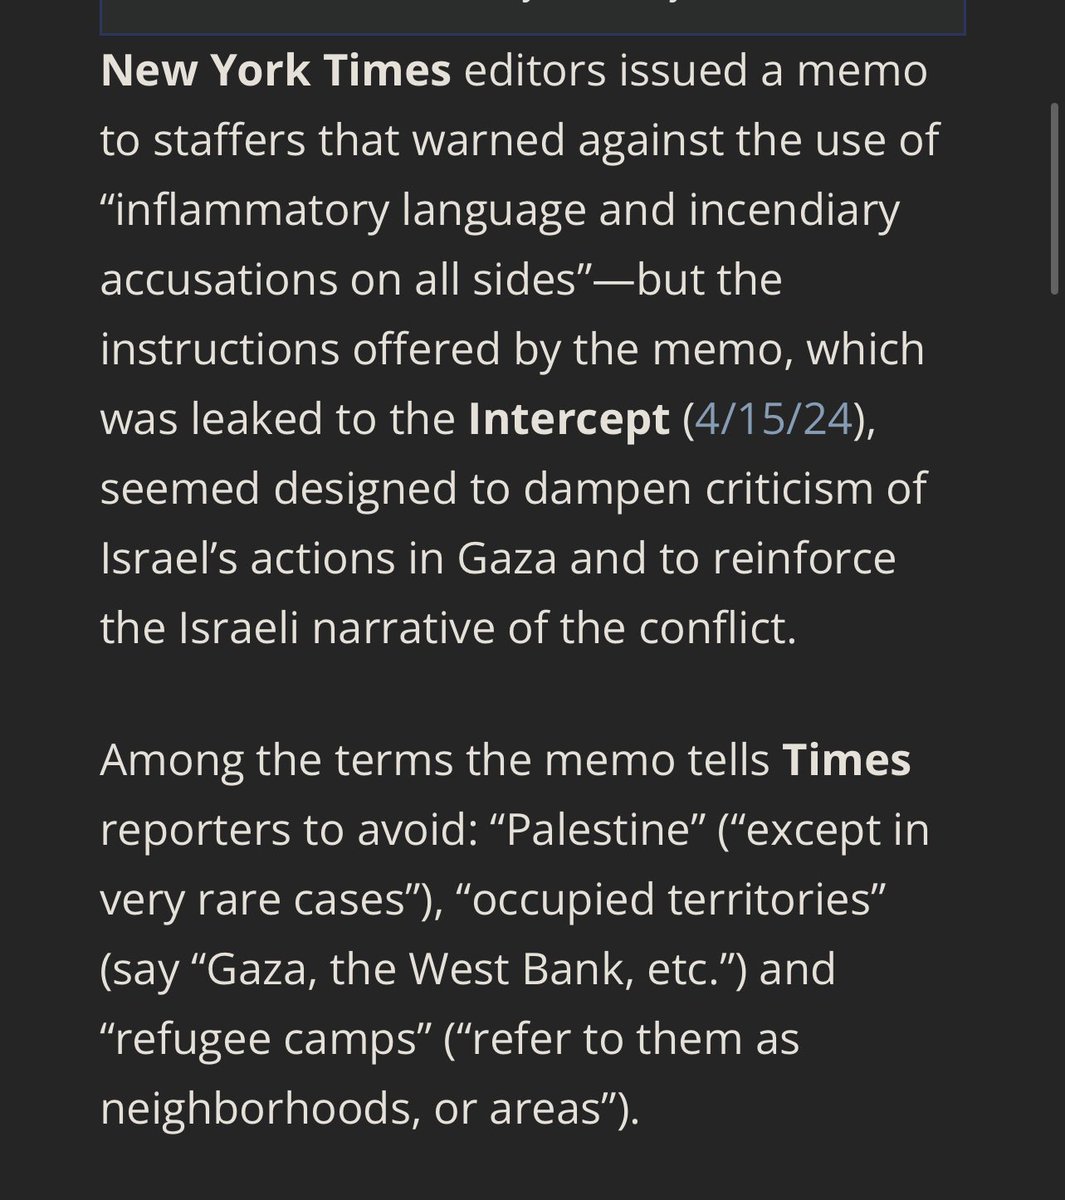 ACTION ALERT from @FAIRmediawatch: NYT's War on Words: Avoid 'Palestine,' 'Genocide,' 'Ethnic Cleansing' Read more + tell @nytimes to revise its guidance on coverage of the Gaza crisis so that it is no longer banning standard descriptions here: fair.org/home/action-al…